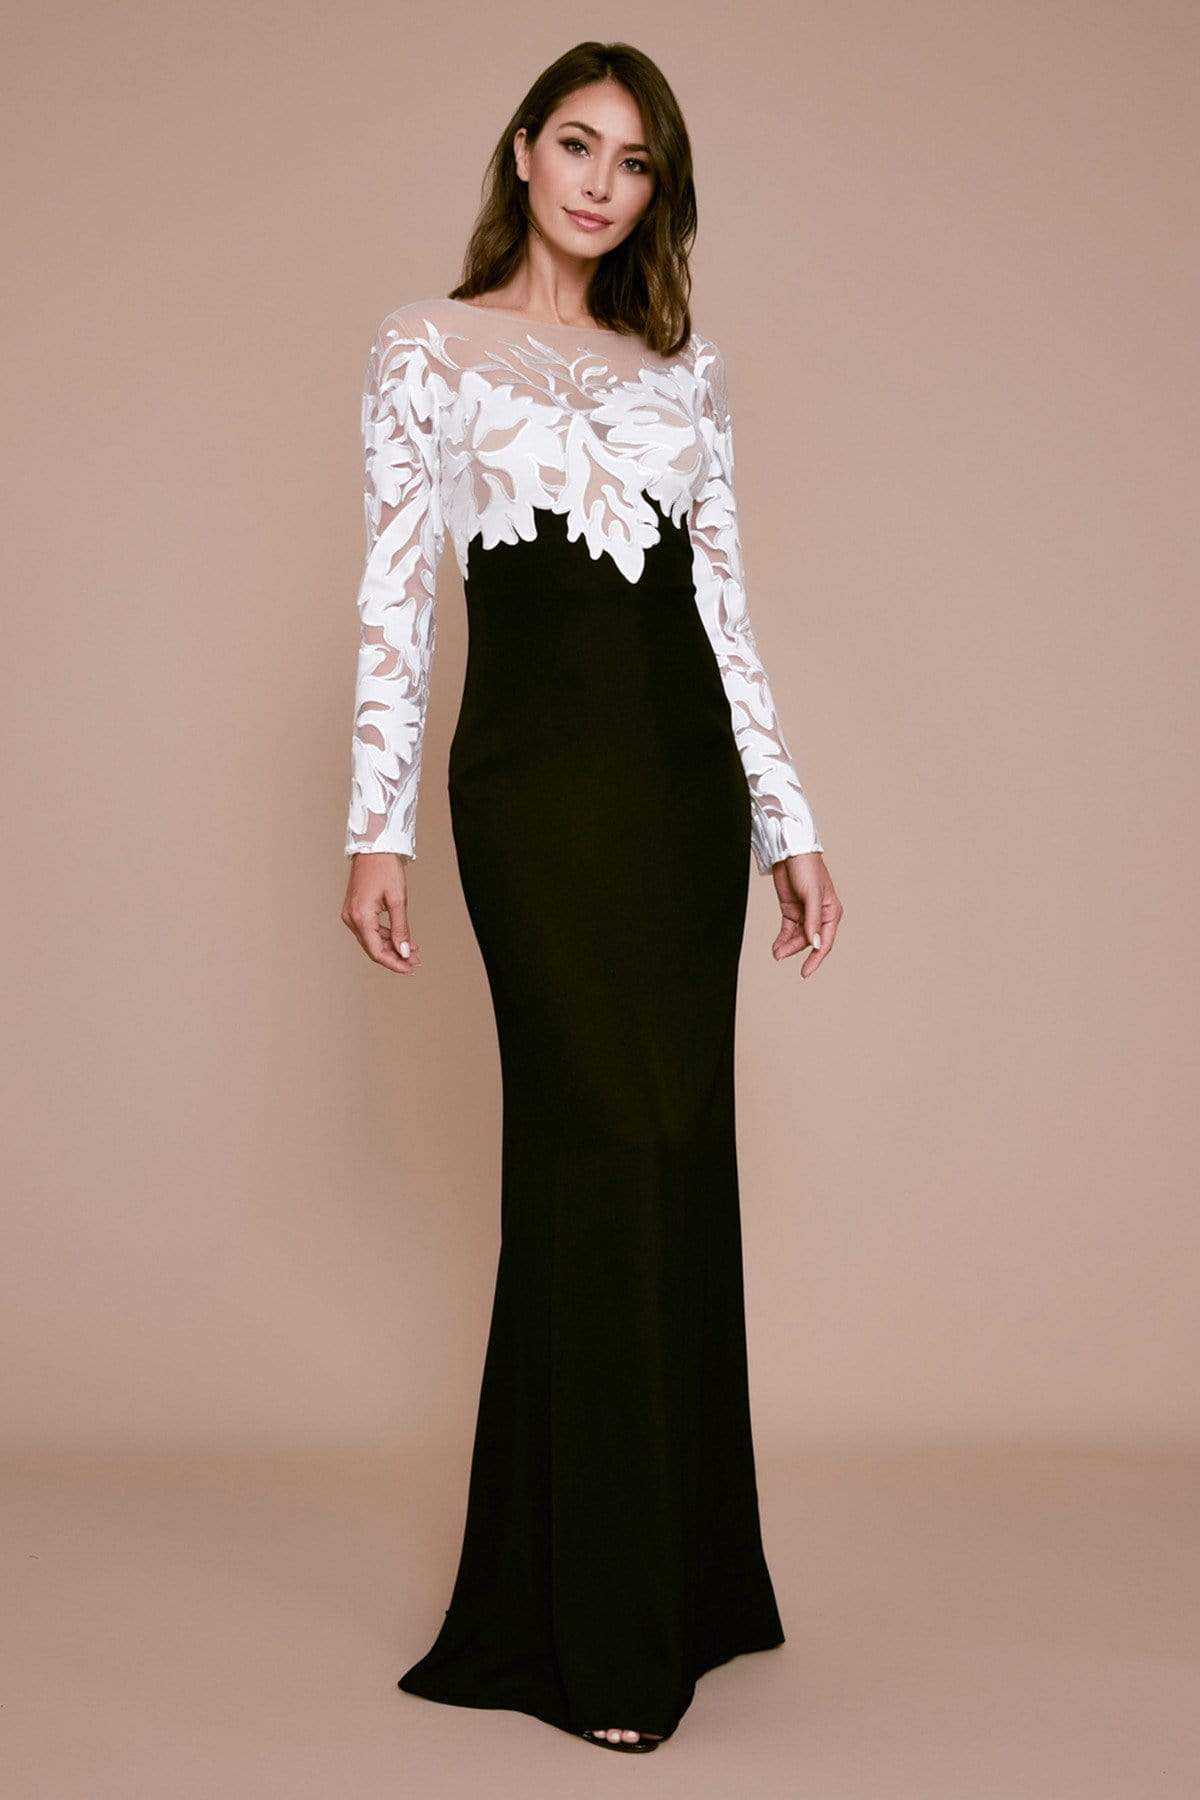 Tadashi Shoji, Tadashi Shoji - Embroidered Long Sleeve Sheath Evening Gown - 1 pc Black/Nude In Size 4 and 1 pc Ivory/Black in Size 8 Available